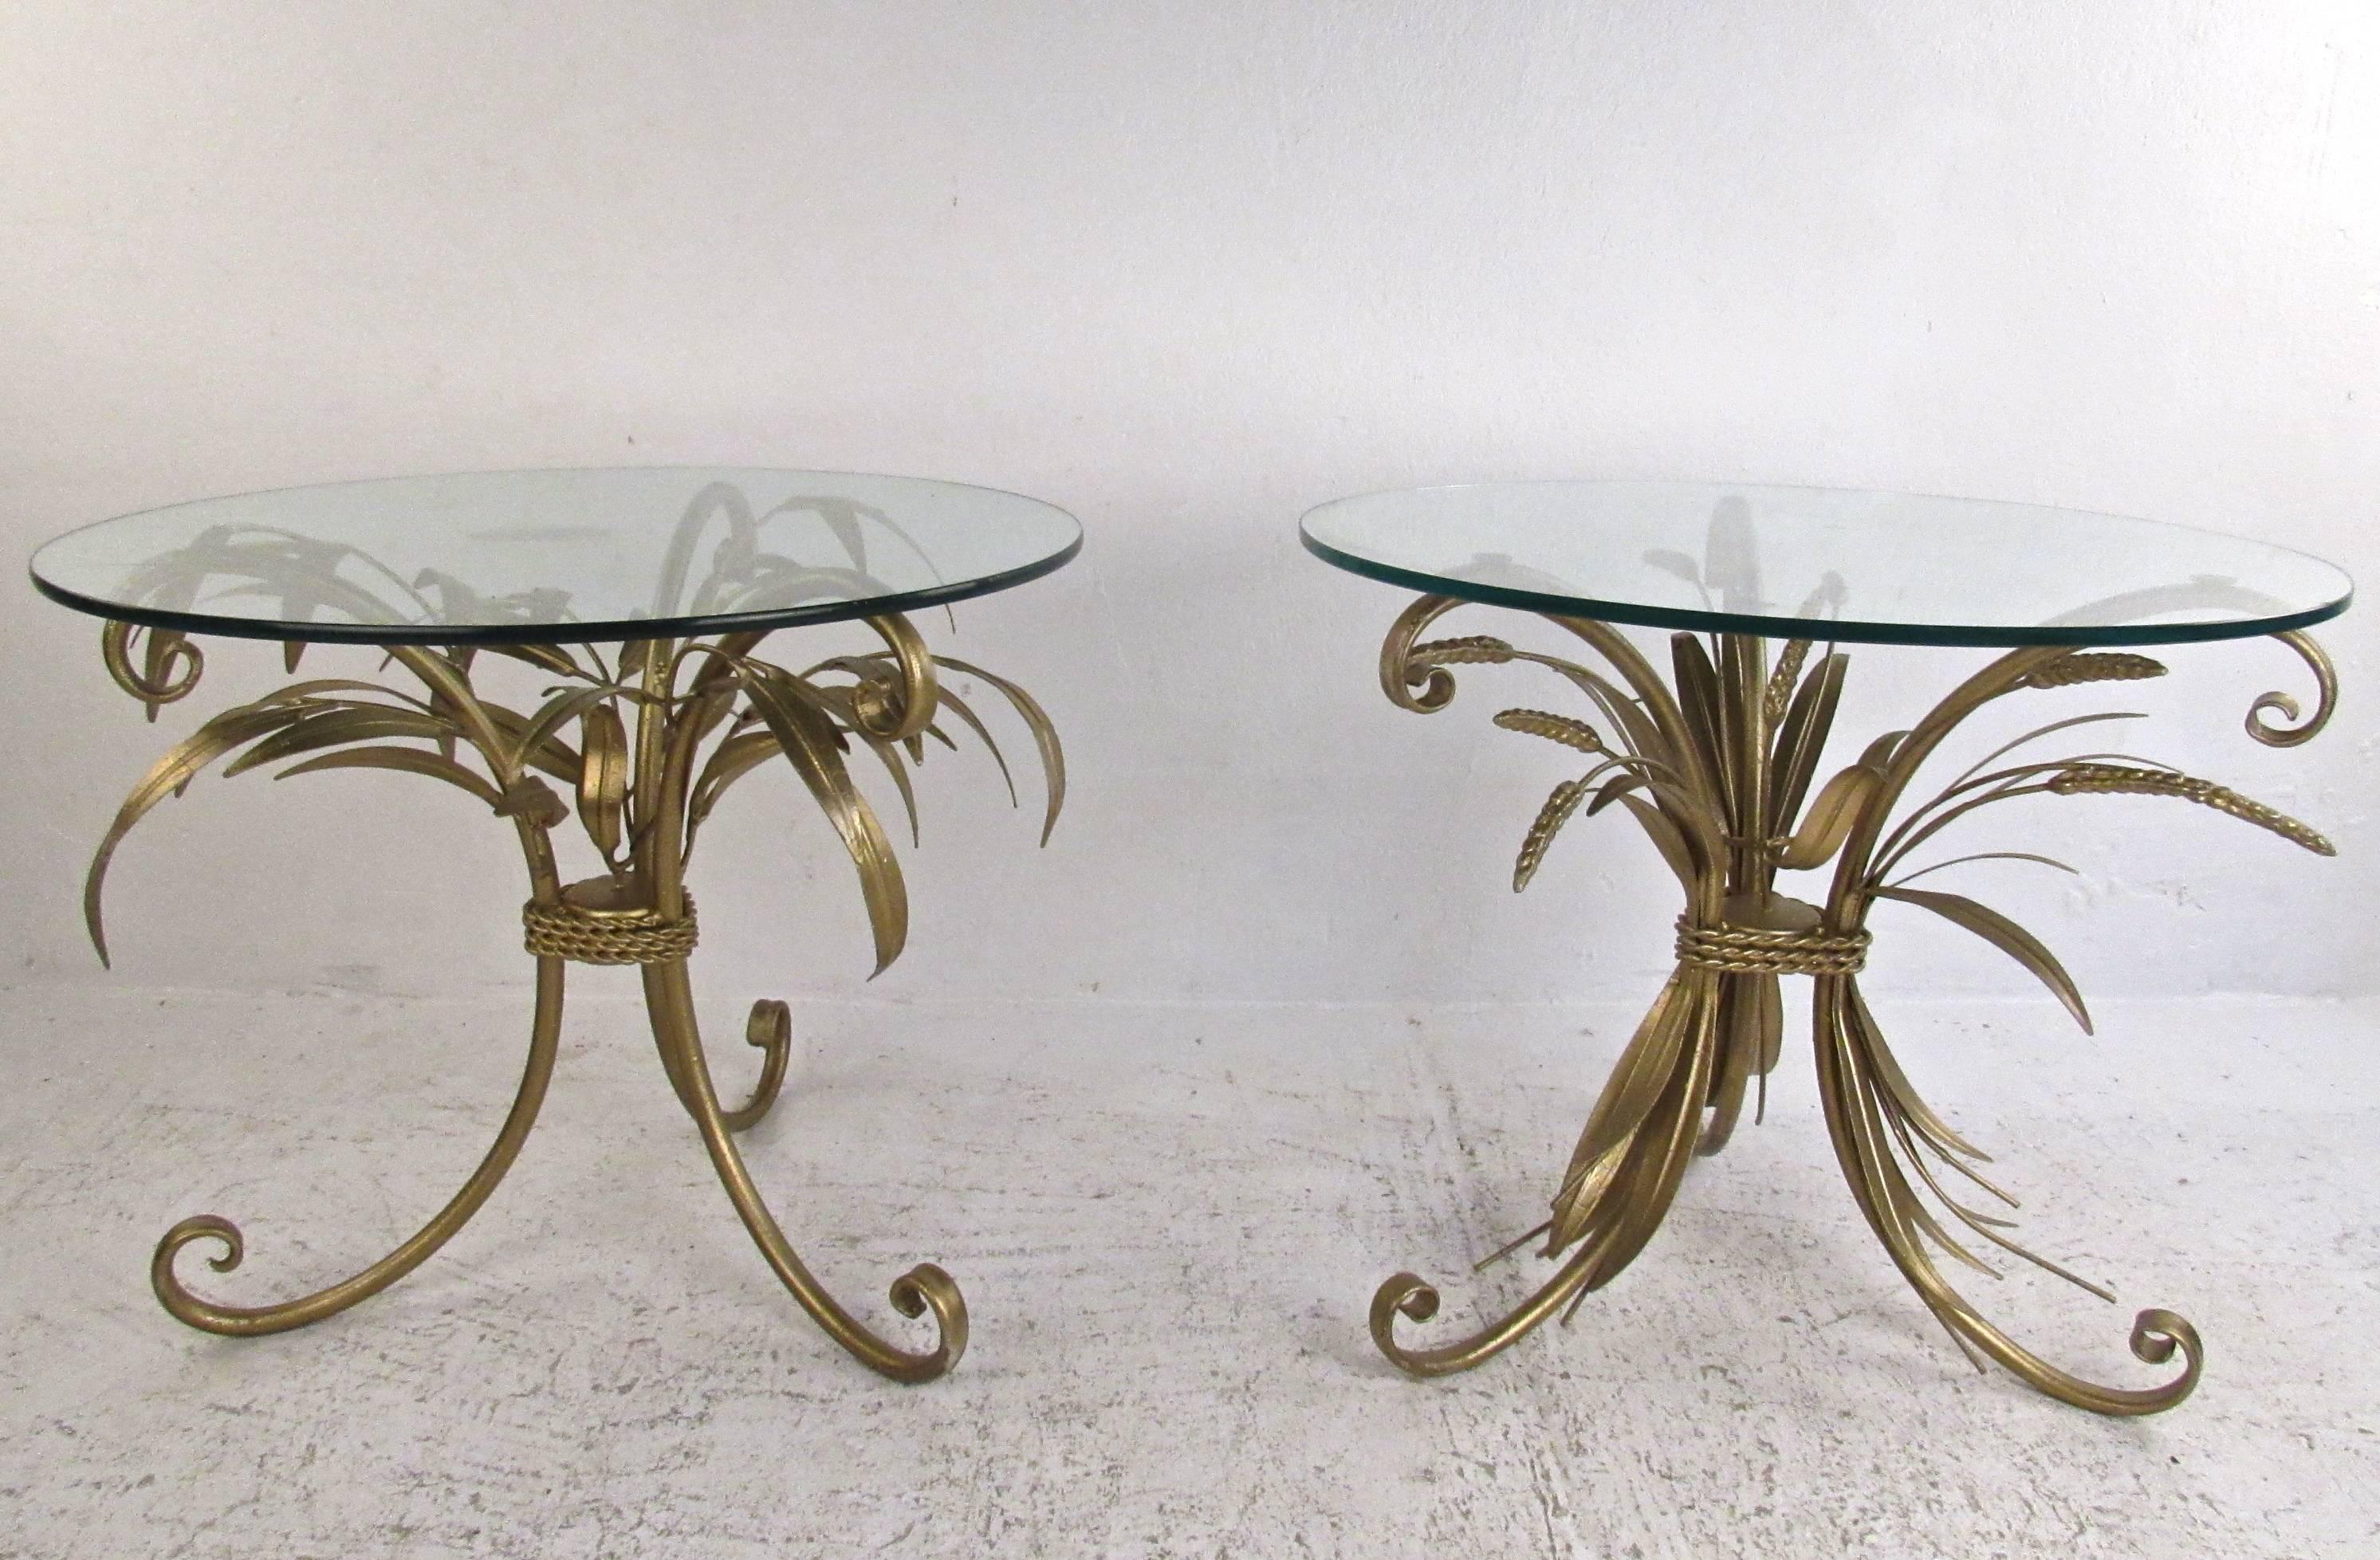 This pair of gilt finish "wheat sheath" end tables features unique decorative details, scrolled legs, and ornate design in the Hollywood Regency style of Coco Chanel. Perfect pair of tables for use in living room or waiting room; please